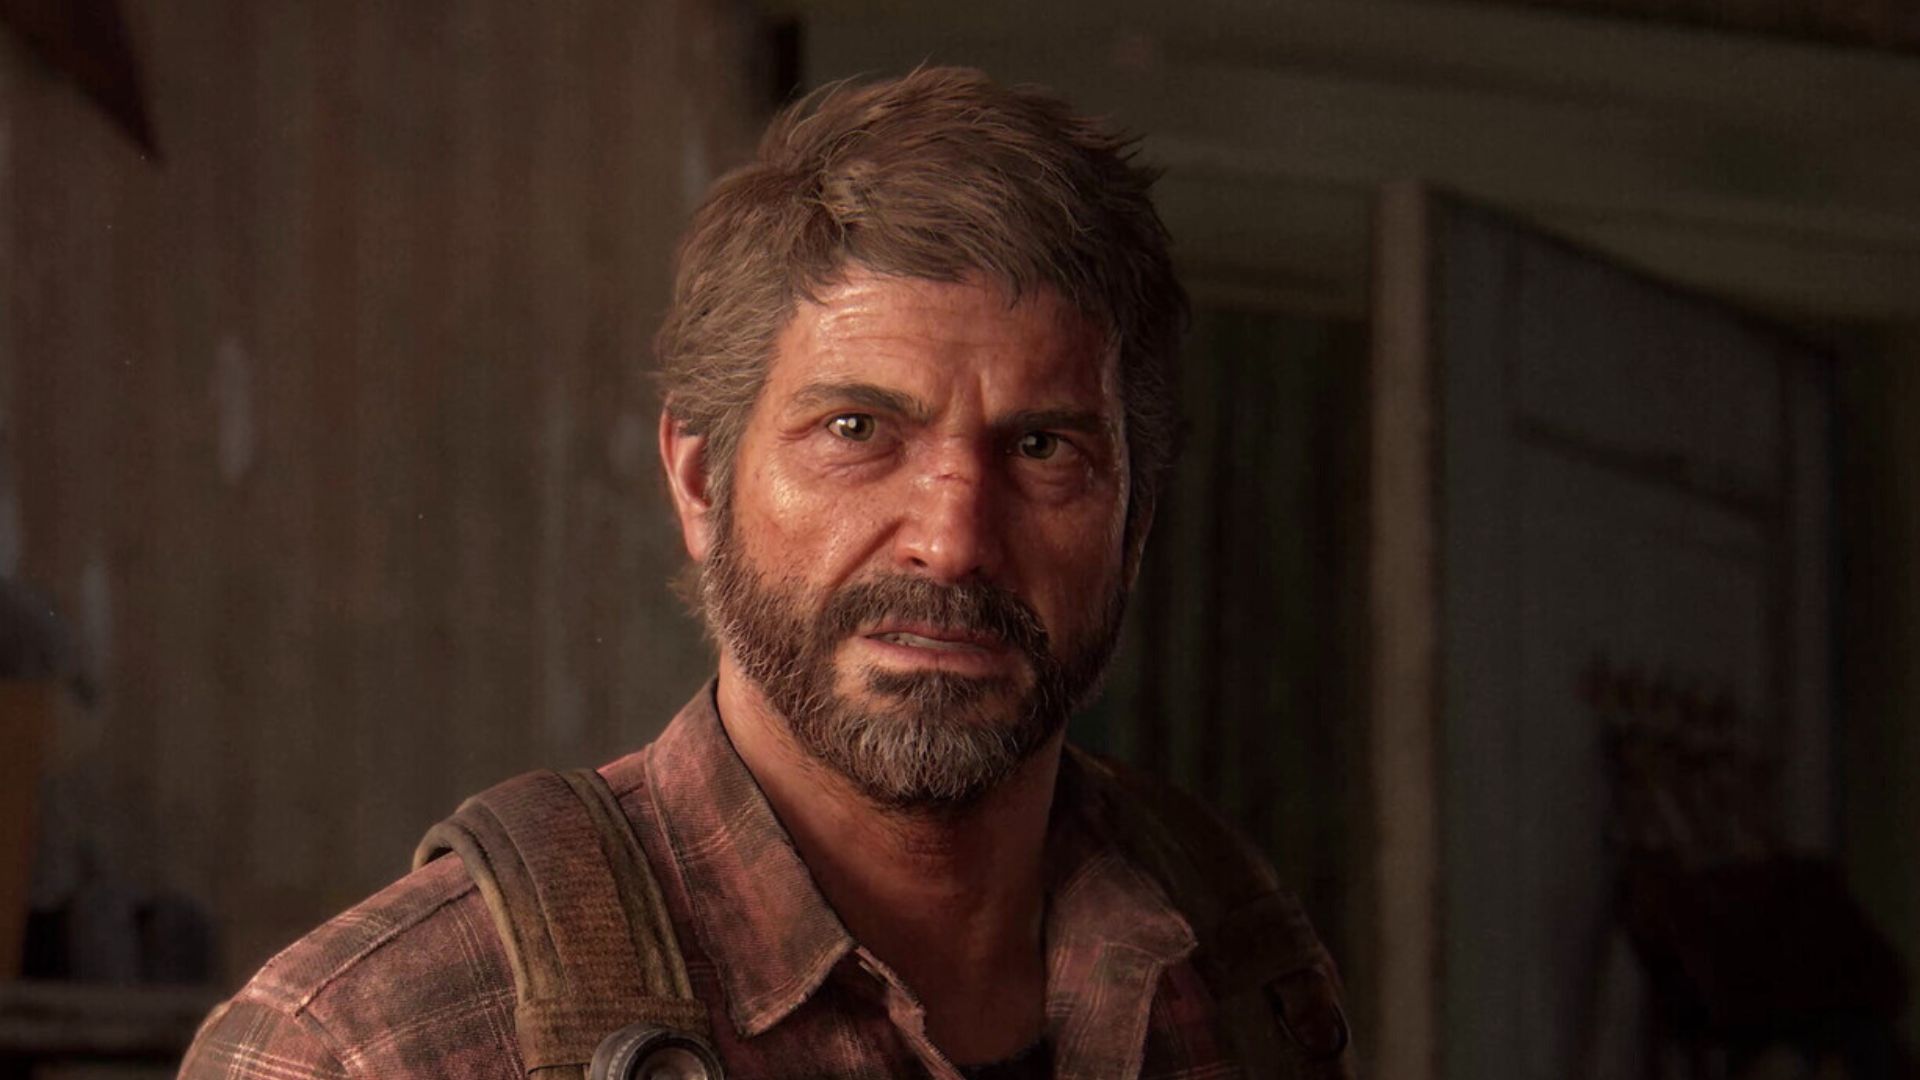 The Last of Us' PC port bombs at launch, and PC gamers are fed up - Polygon